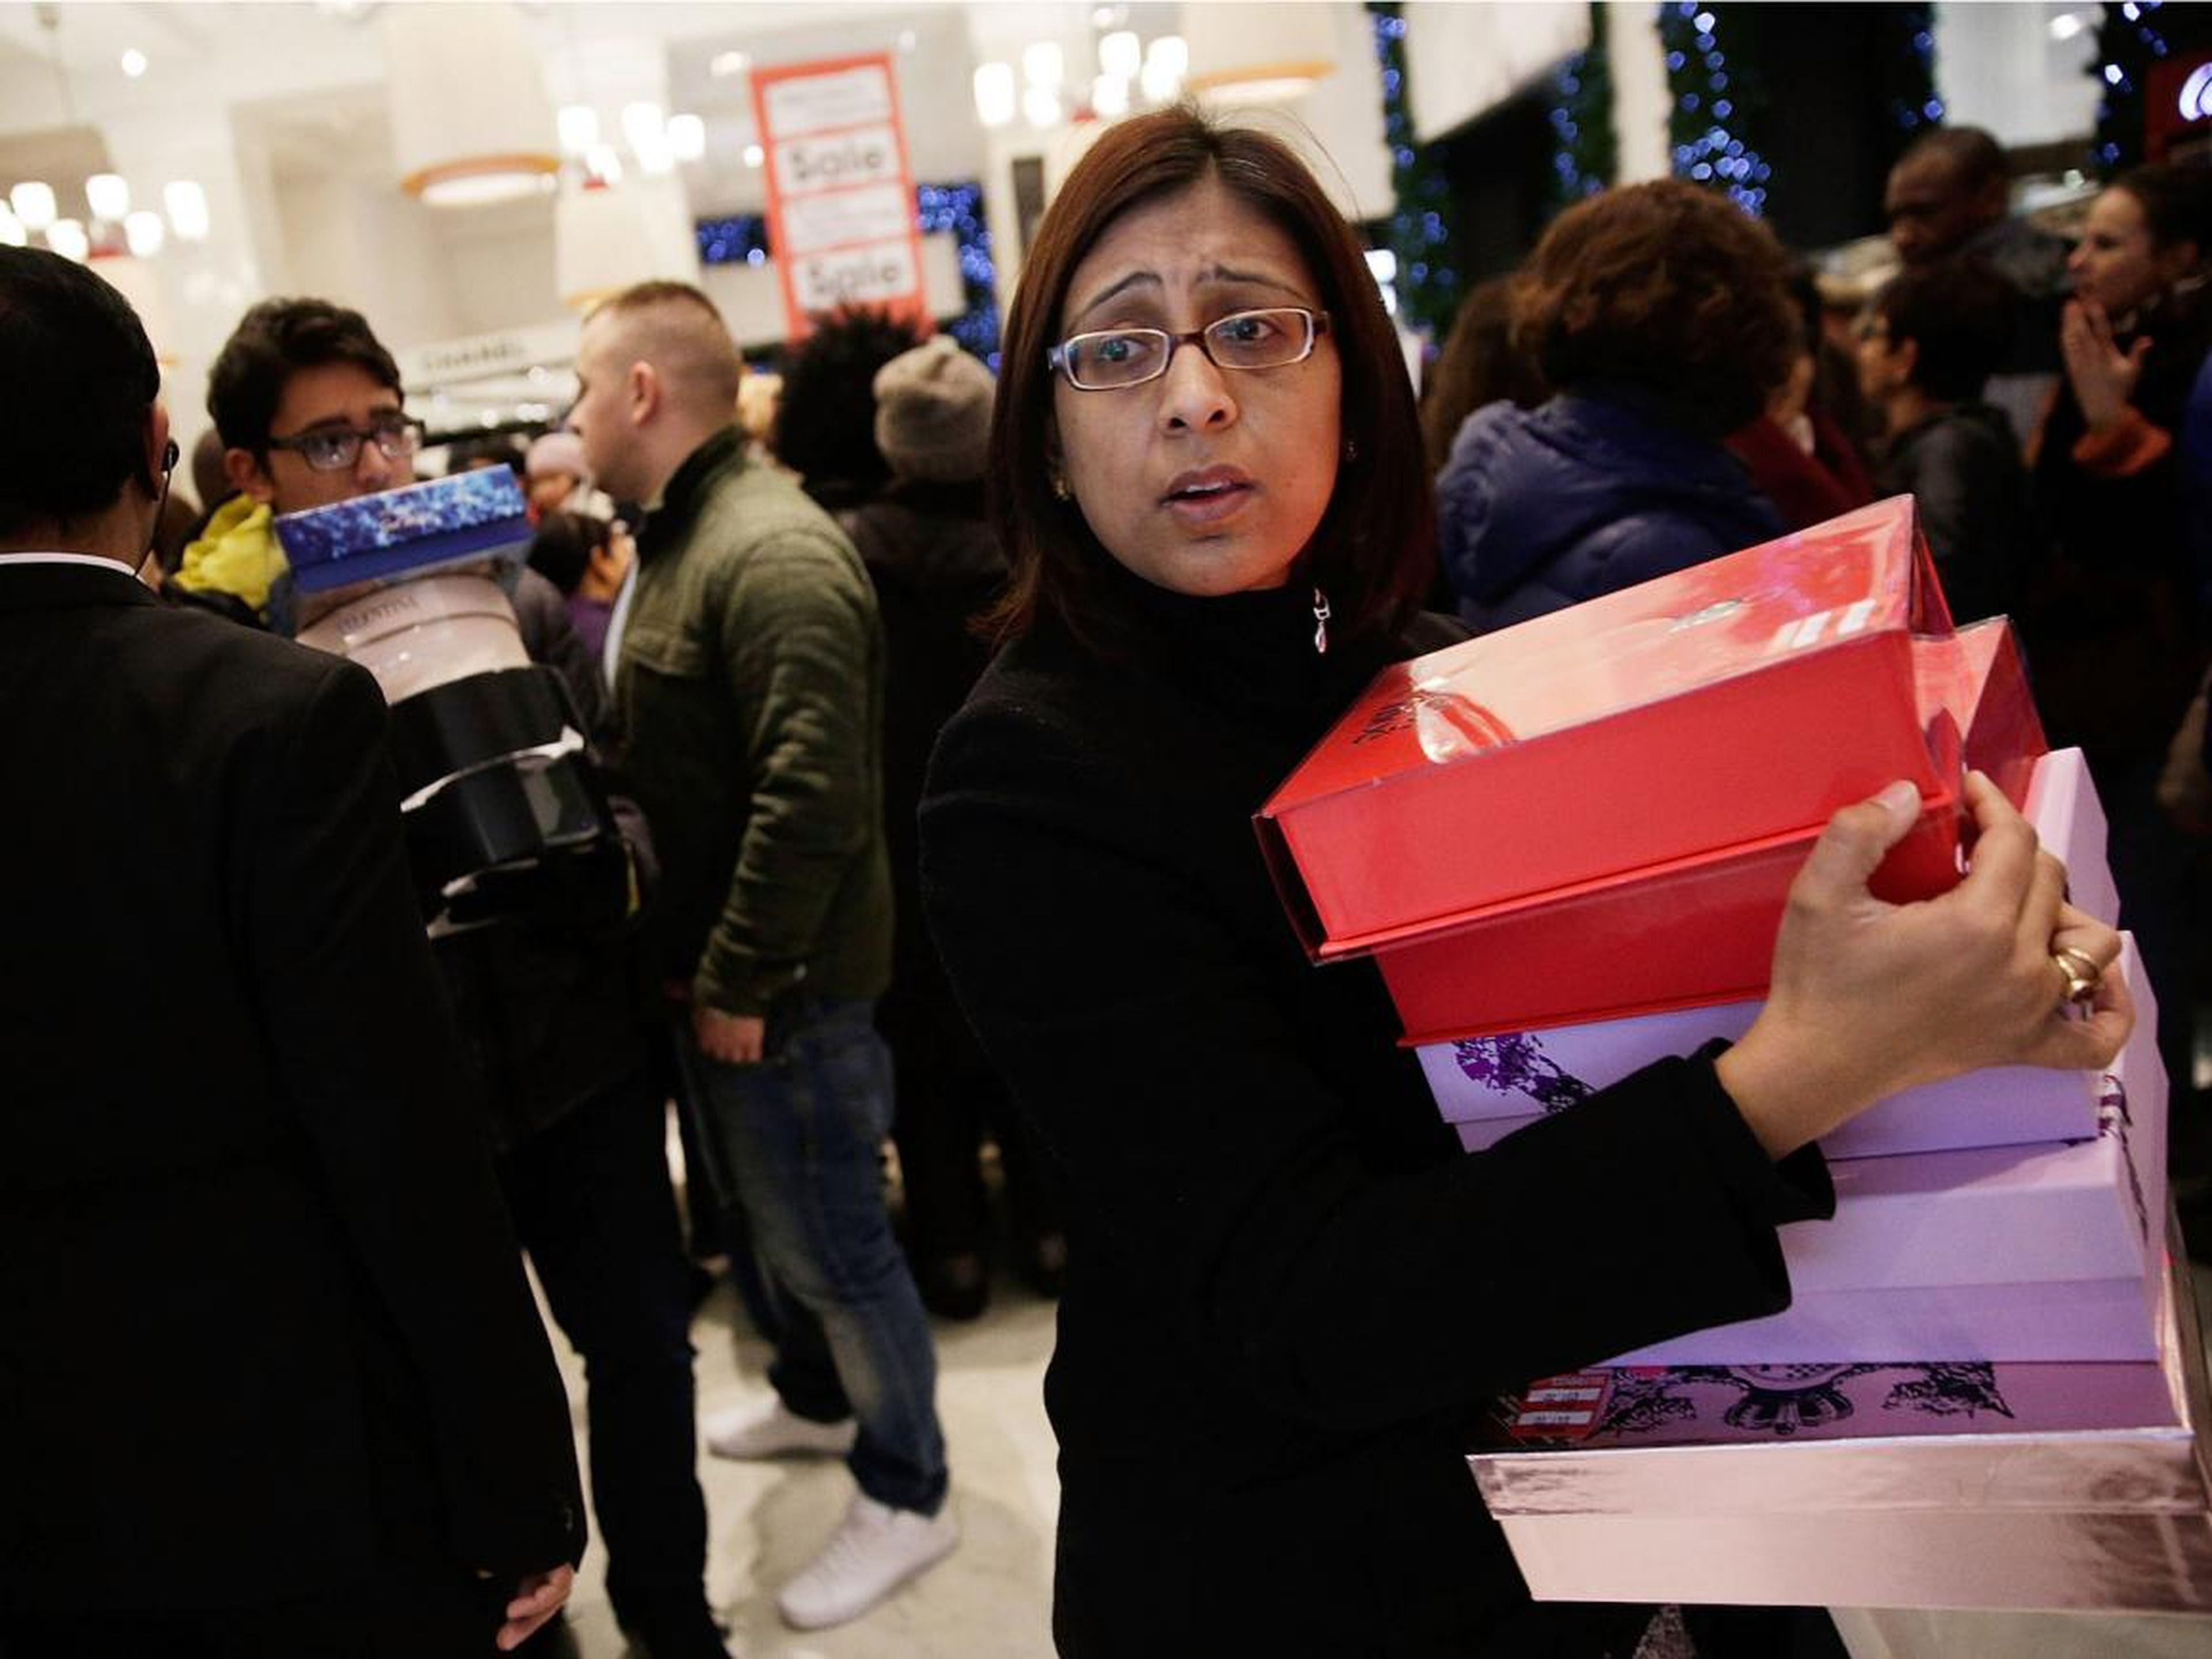 ... Boxing Day is also still a huge shopping day in the UK.